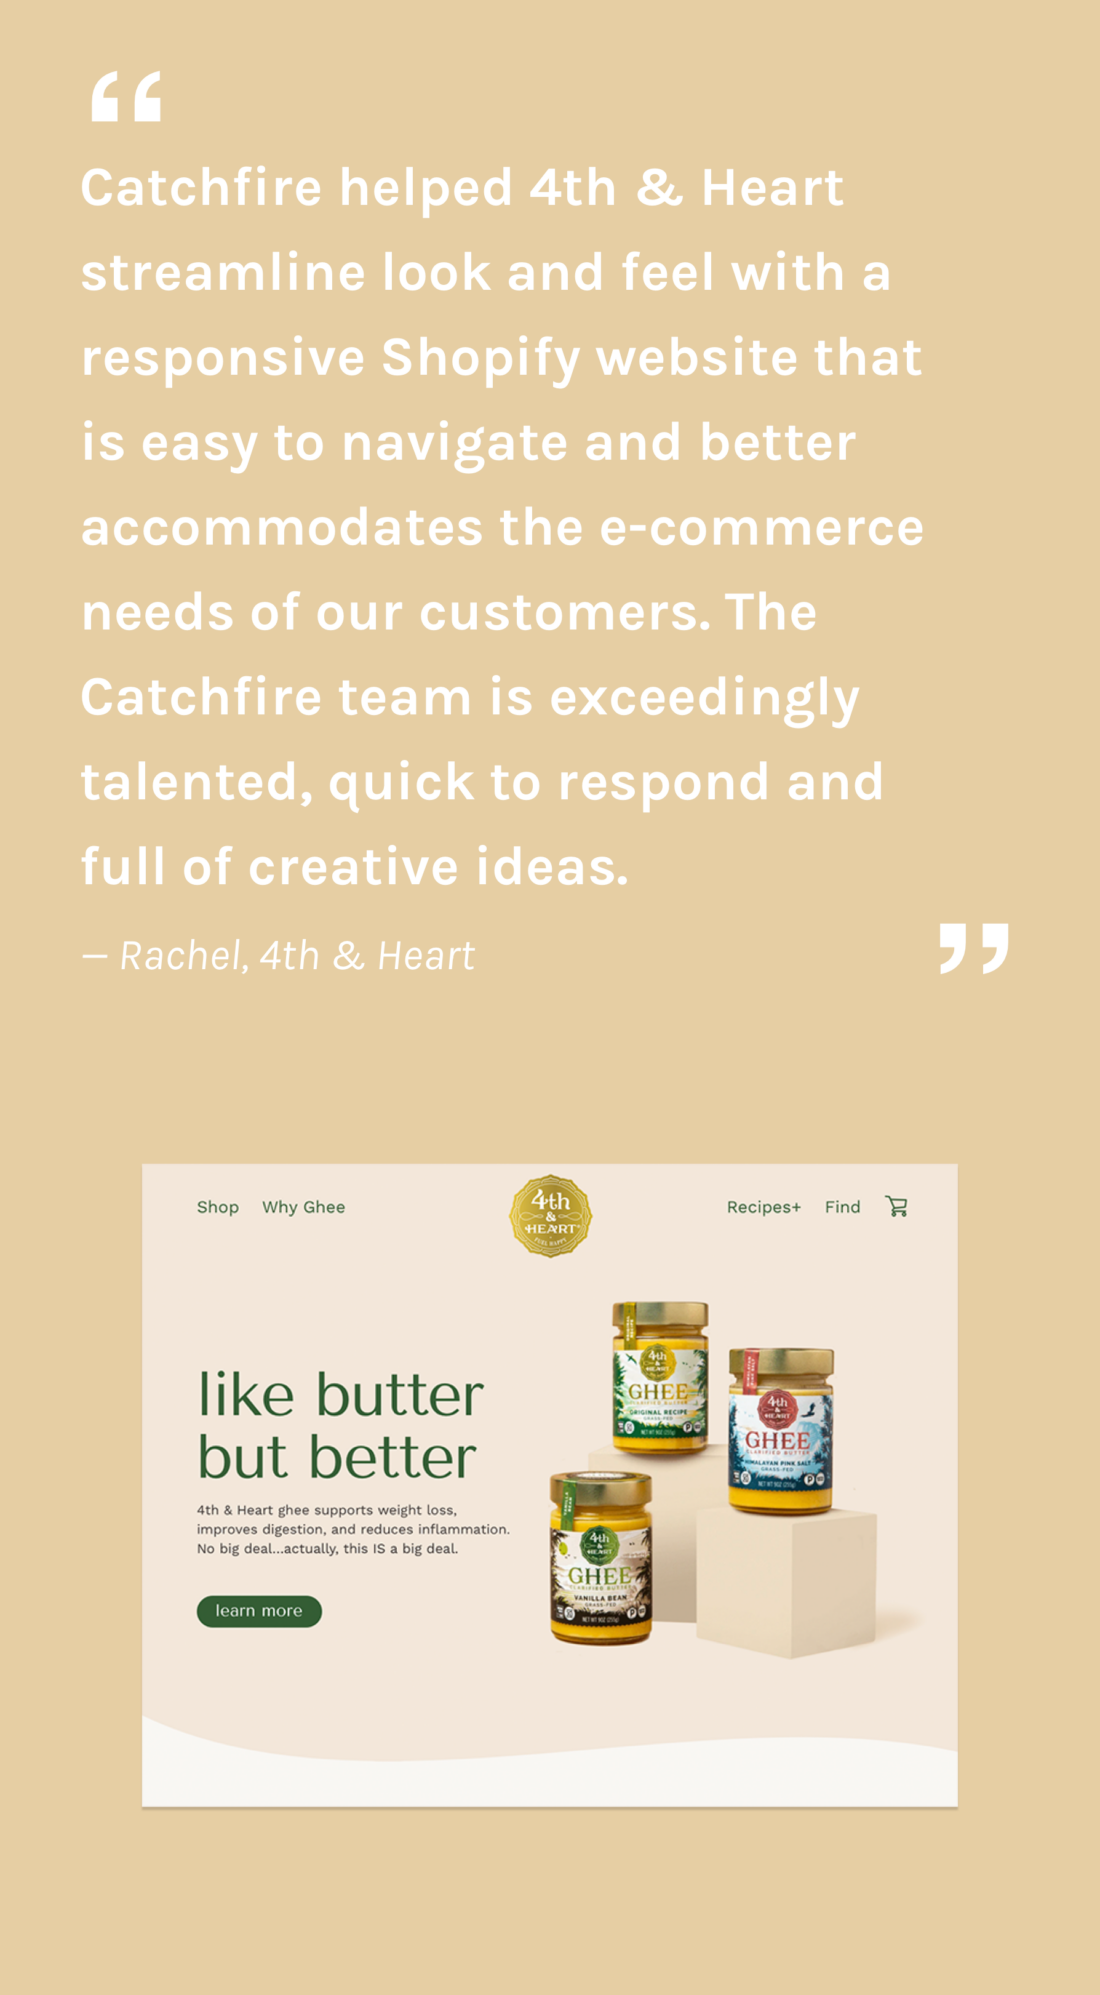 Catchfire helped 4th & Heart streamline look and feel with a responsive Shopify website that  is easy to a and better accommodates the e-commerce needs of our customers. The Catchfire team is exceedingly talented, quick to respond and  full of creative ideas.  — Rachel, 4th & Heart